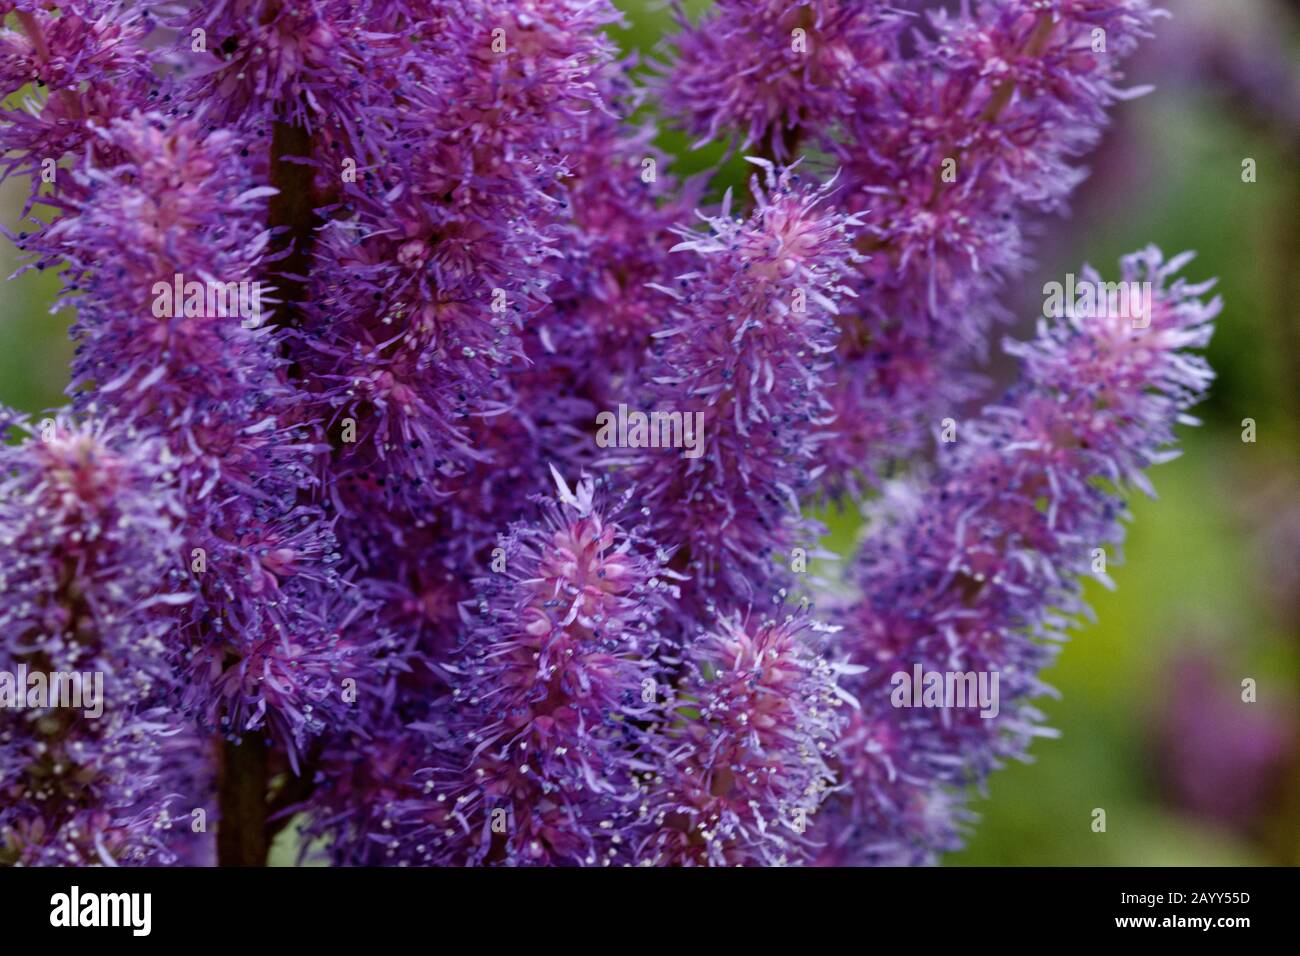 Astilbe is a genus of 18 species of rhizomatous flowering plants within the family Saxifragaceae, native to Asia and  North America. Stock Photo